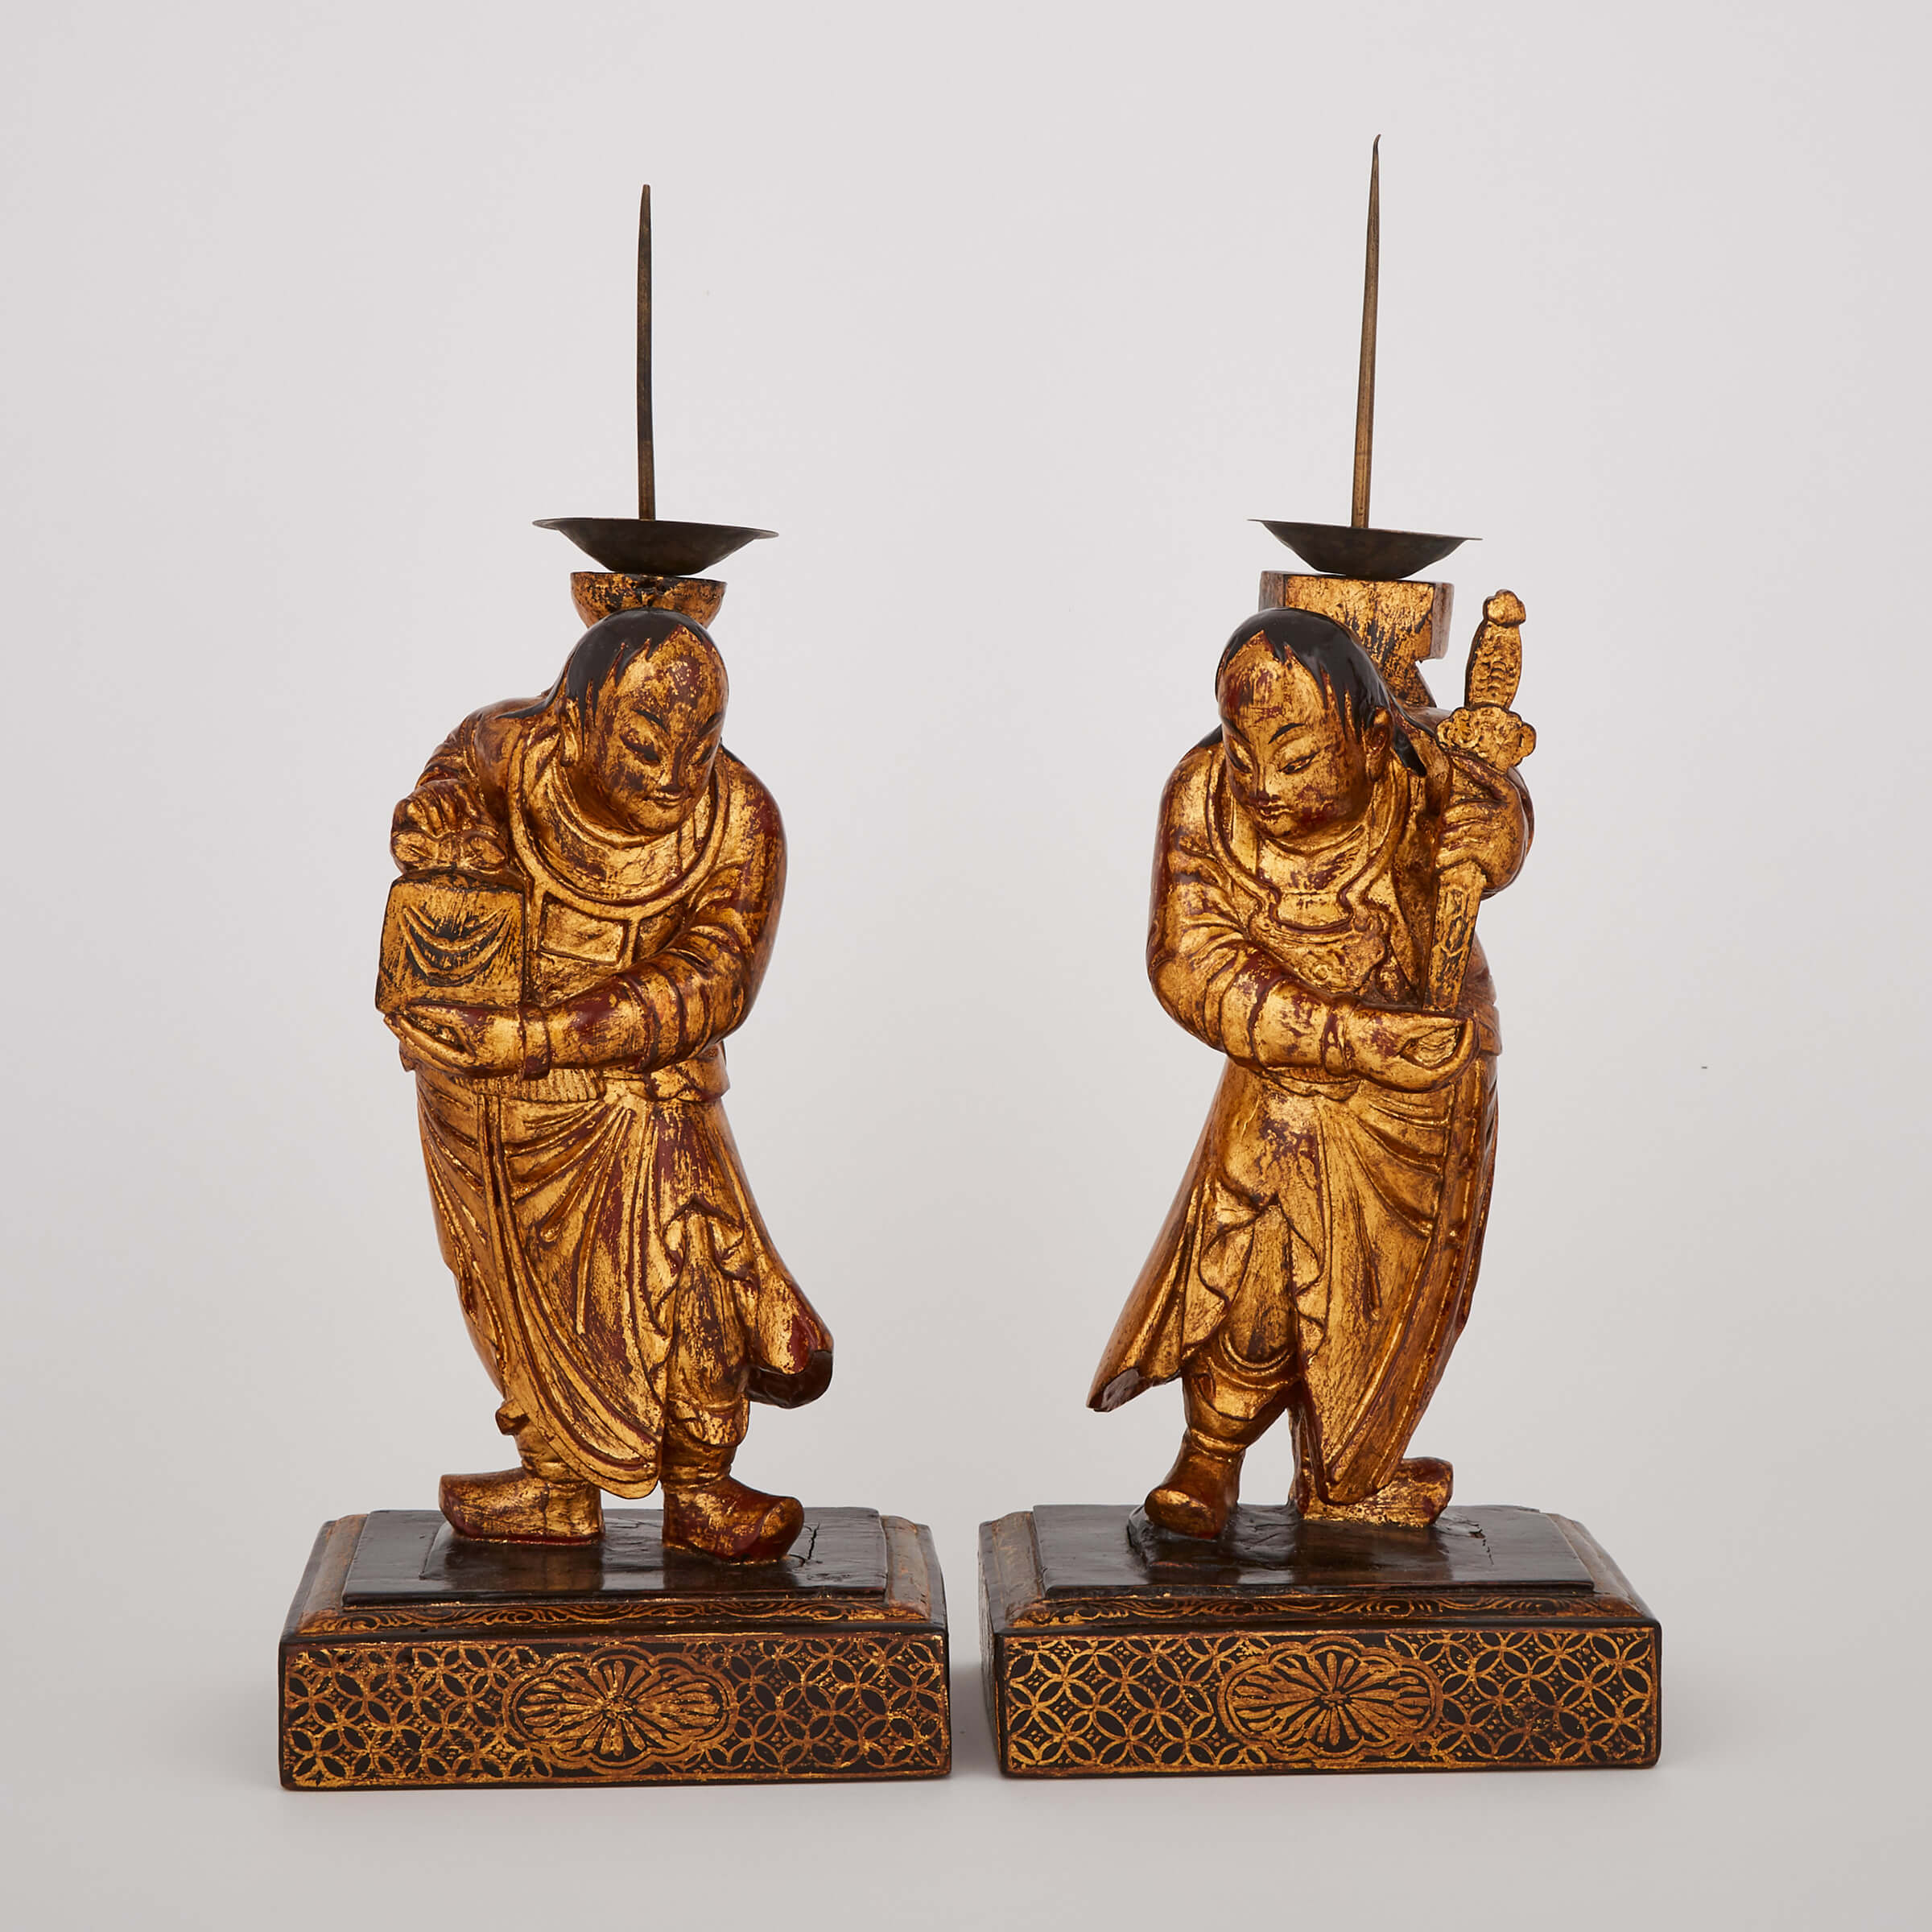 A Pair of Gilt Wood Figural Candle Holders of Guan Ping and Zhou Cang, 19th Century